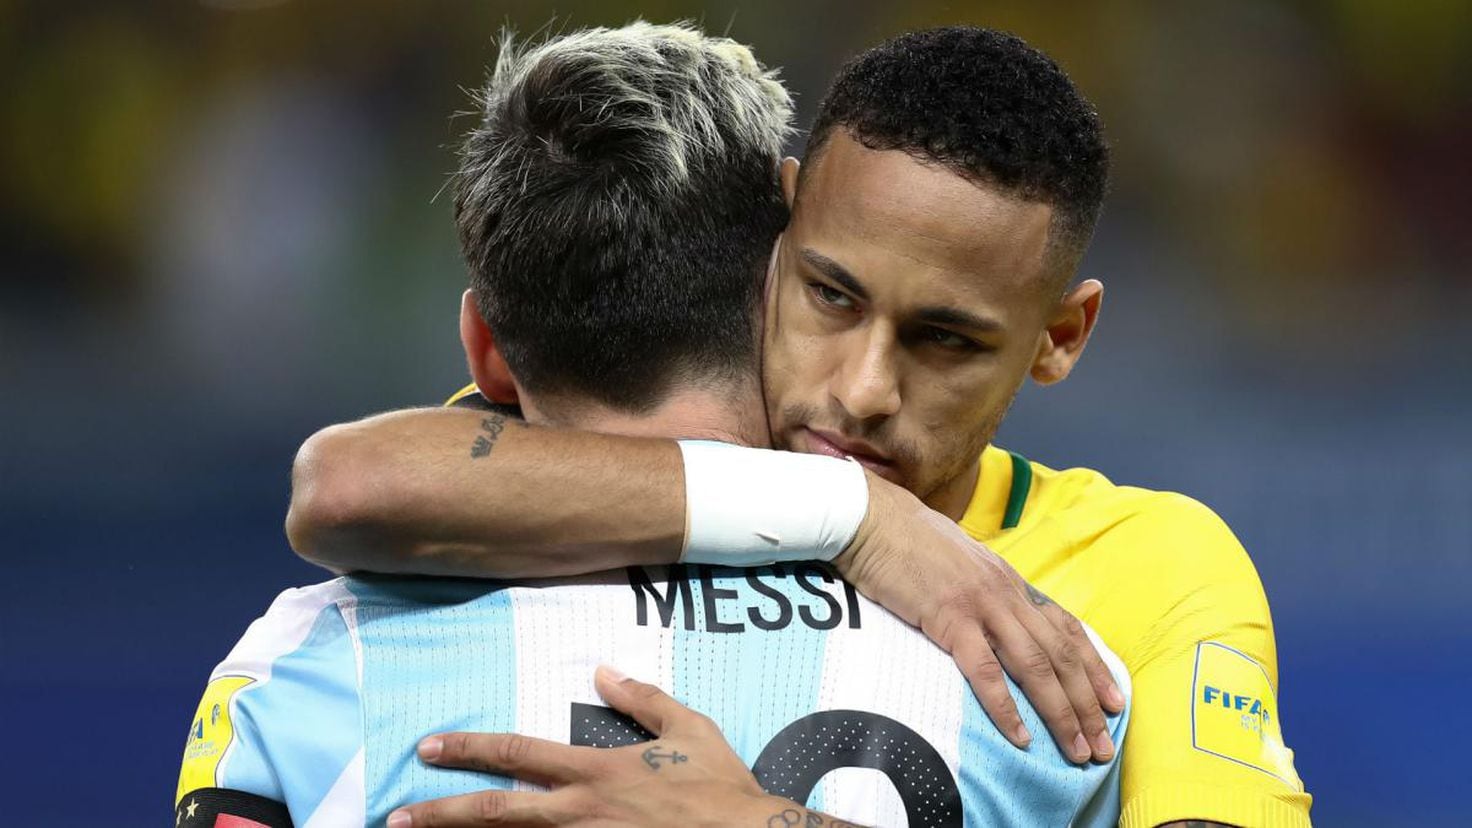 Neymar is the second best player in world behind Lionel Messi and AHEAD of Cristiano  Ronaldo, claims ex-Barca president – The US Sun